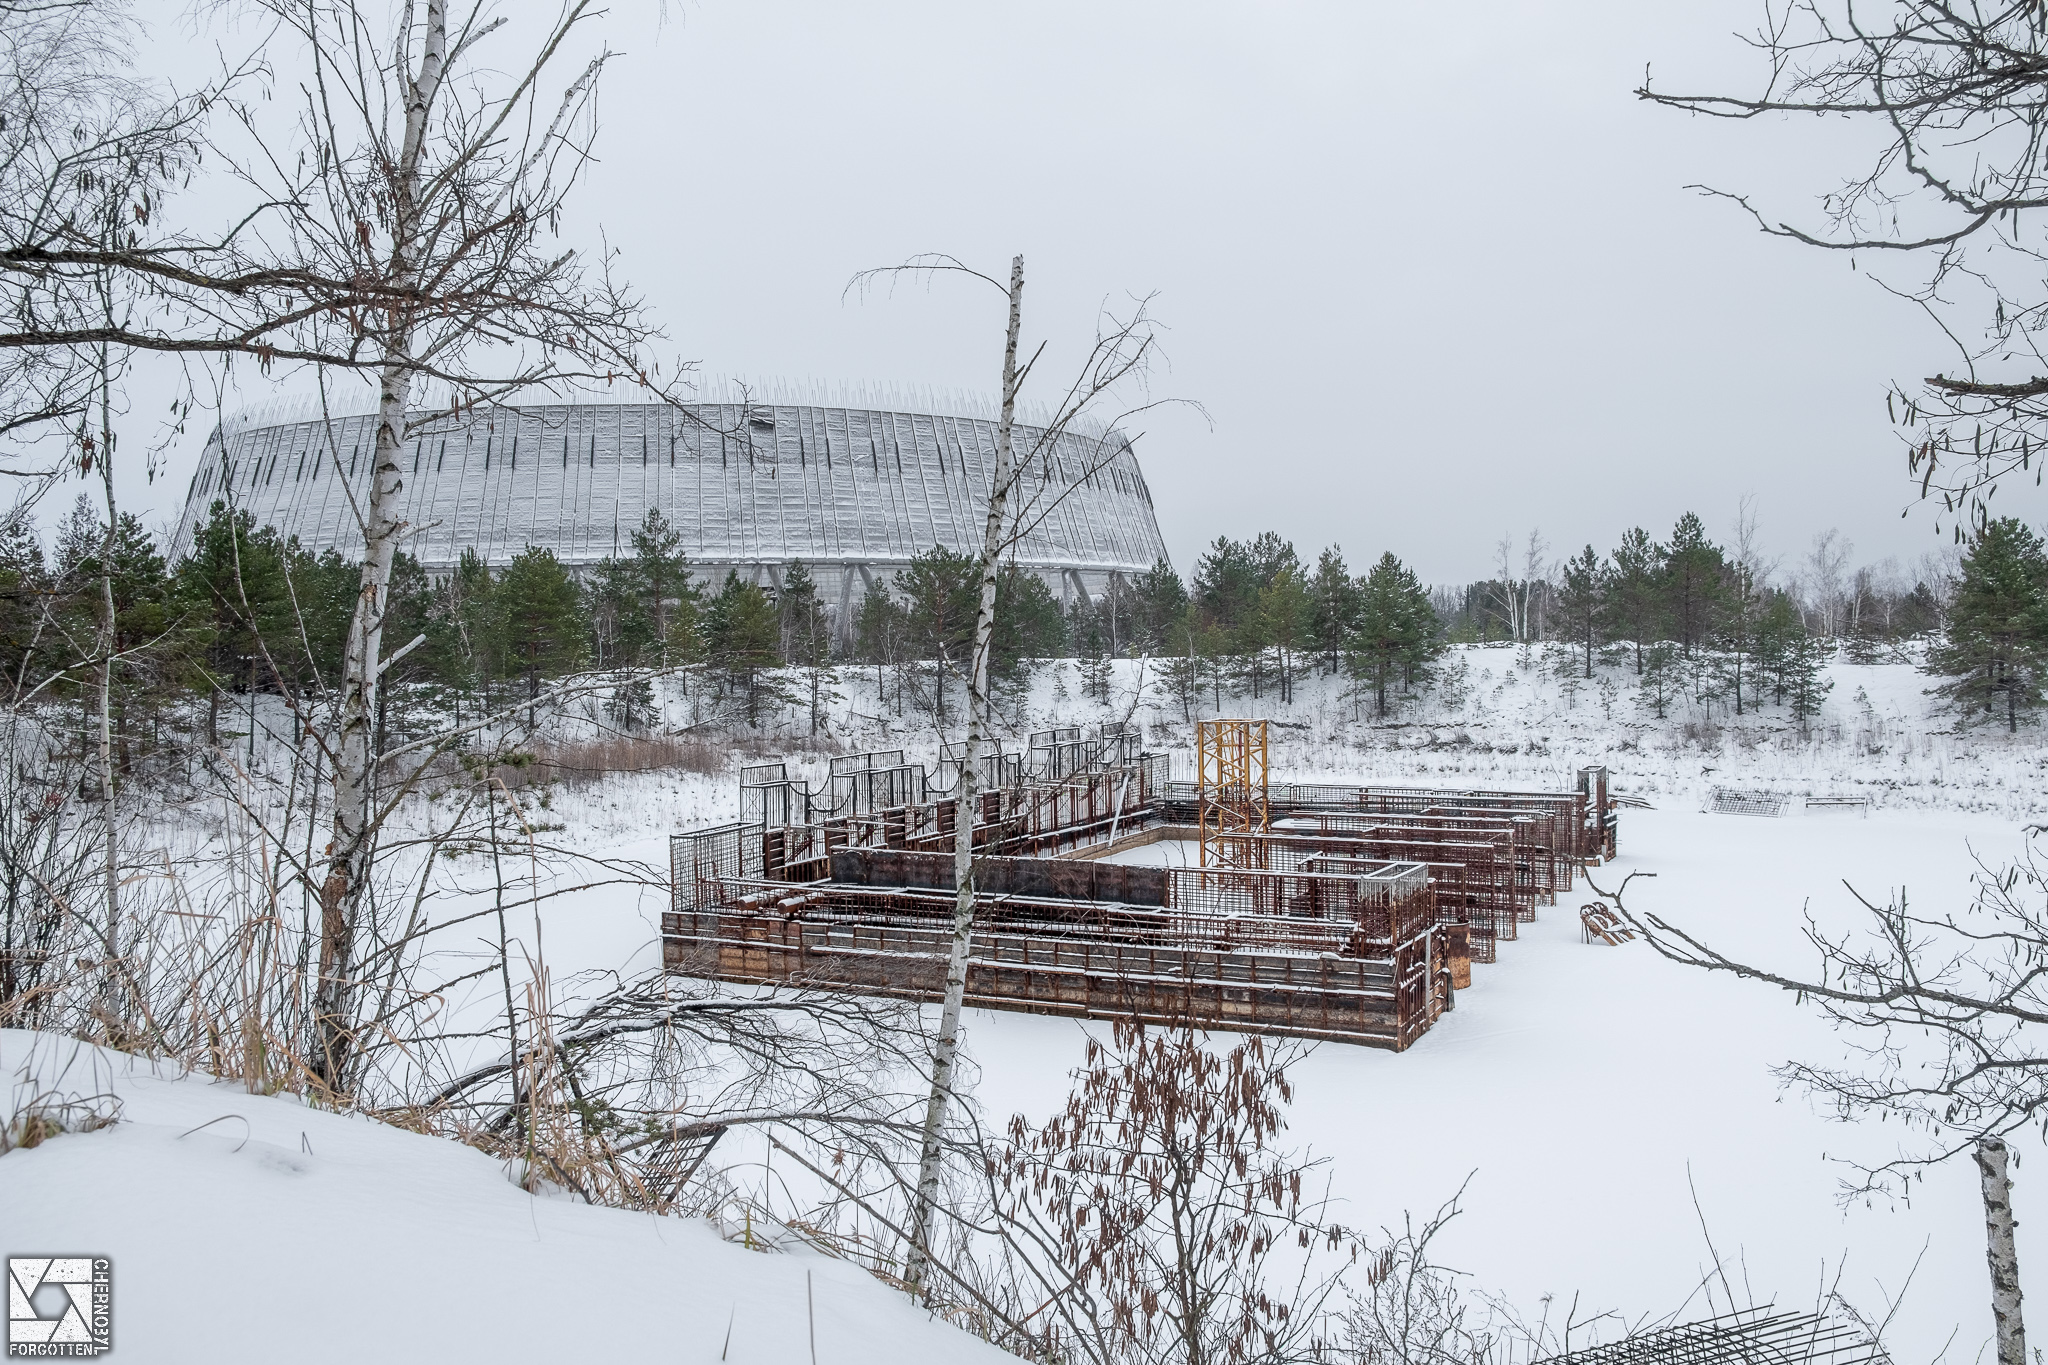 Chernobyl Cooling Towers in Winter